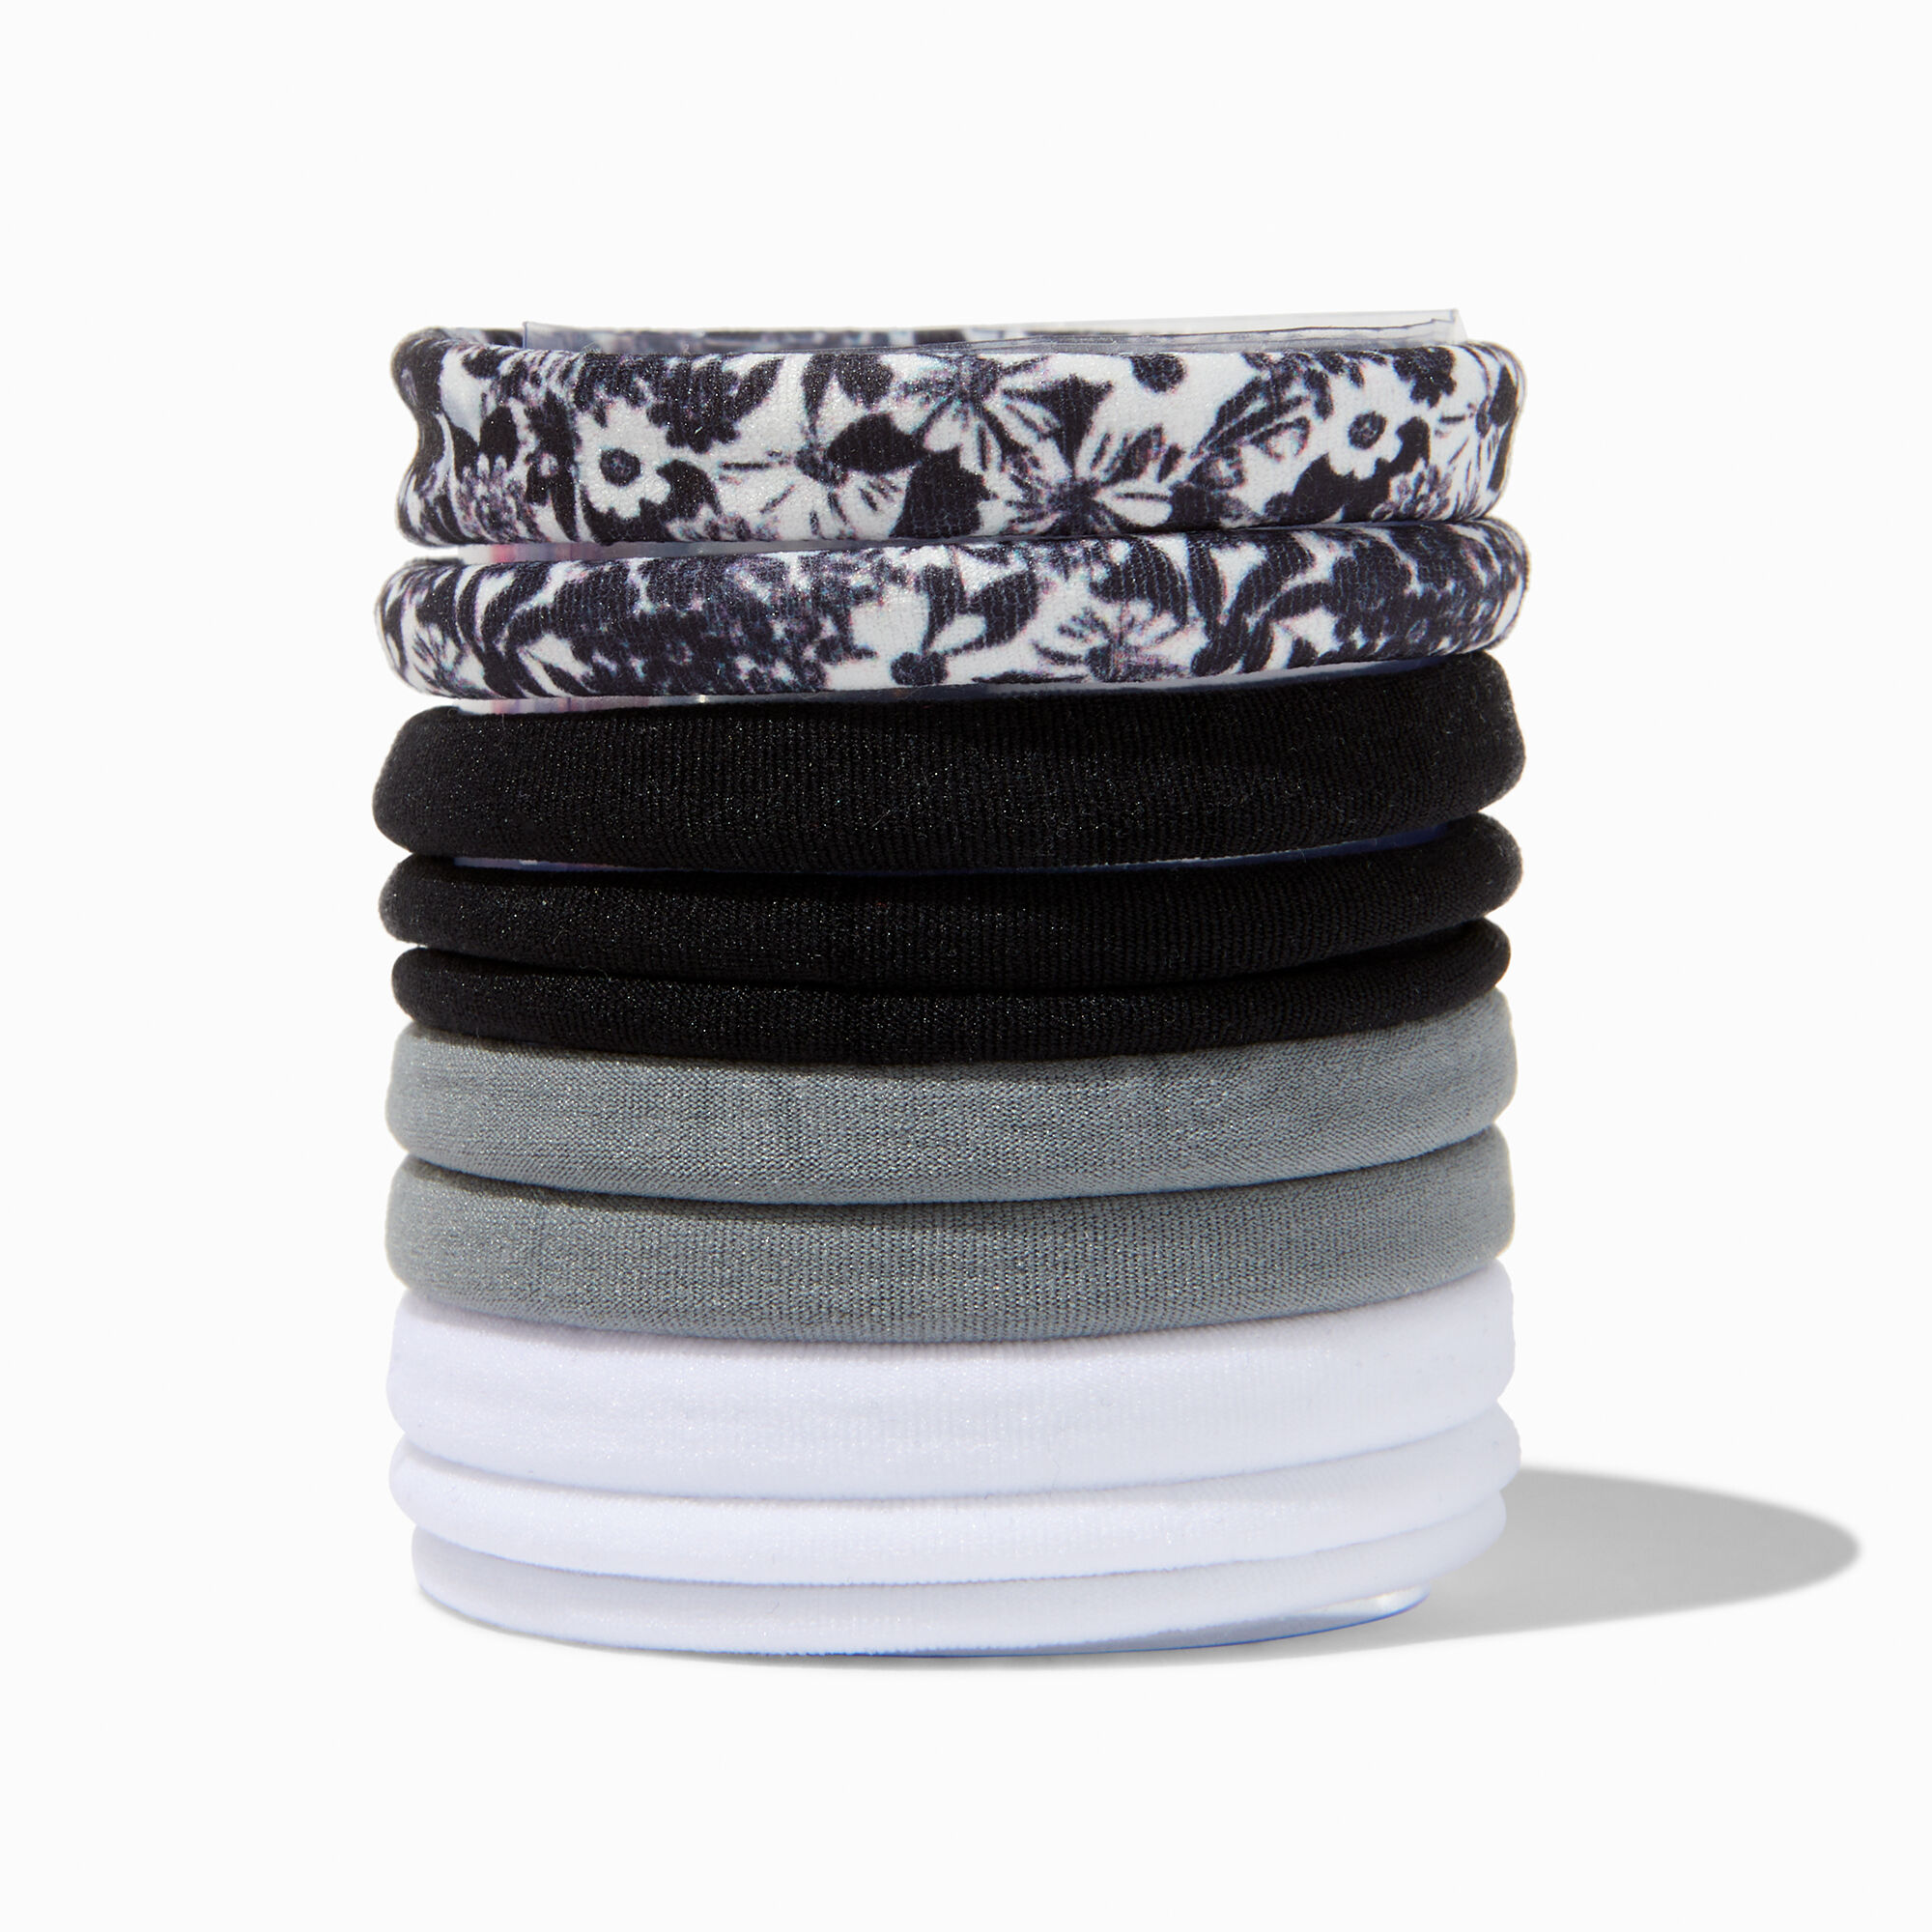 View Claires Black Floral Rolled Hair Ties 10 Pack White information